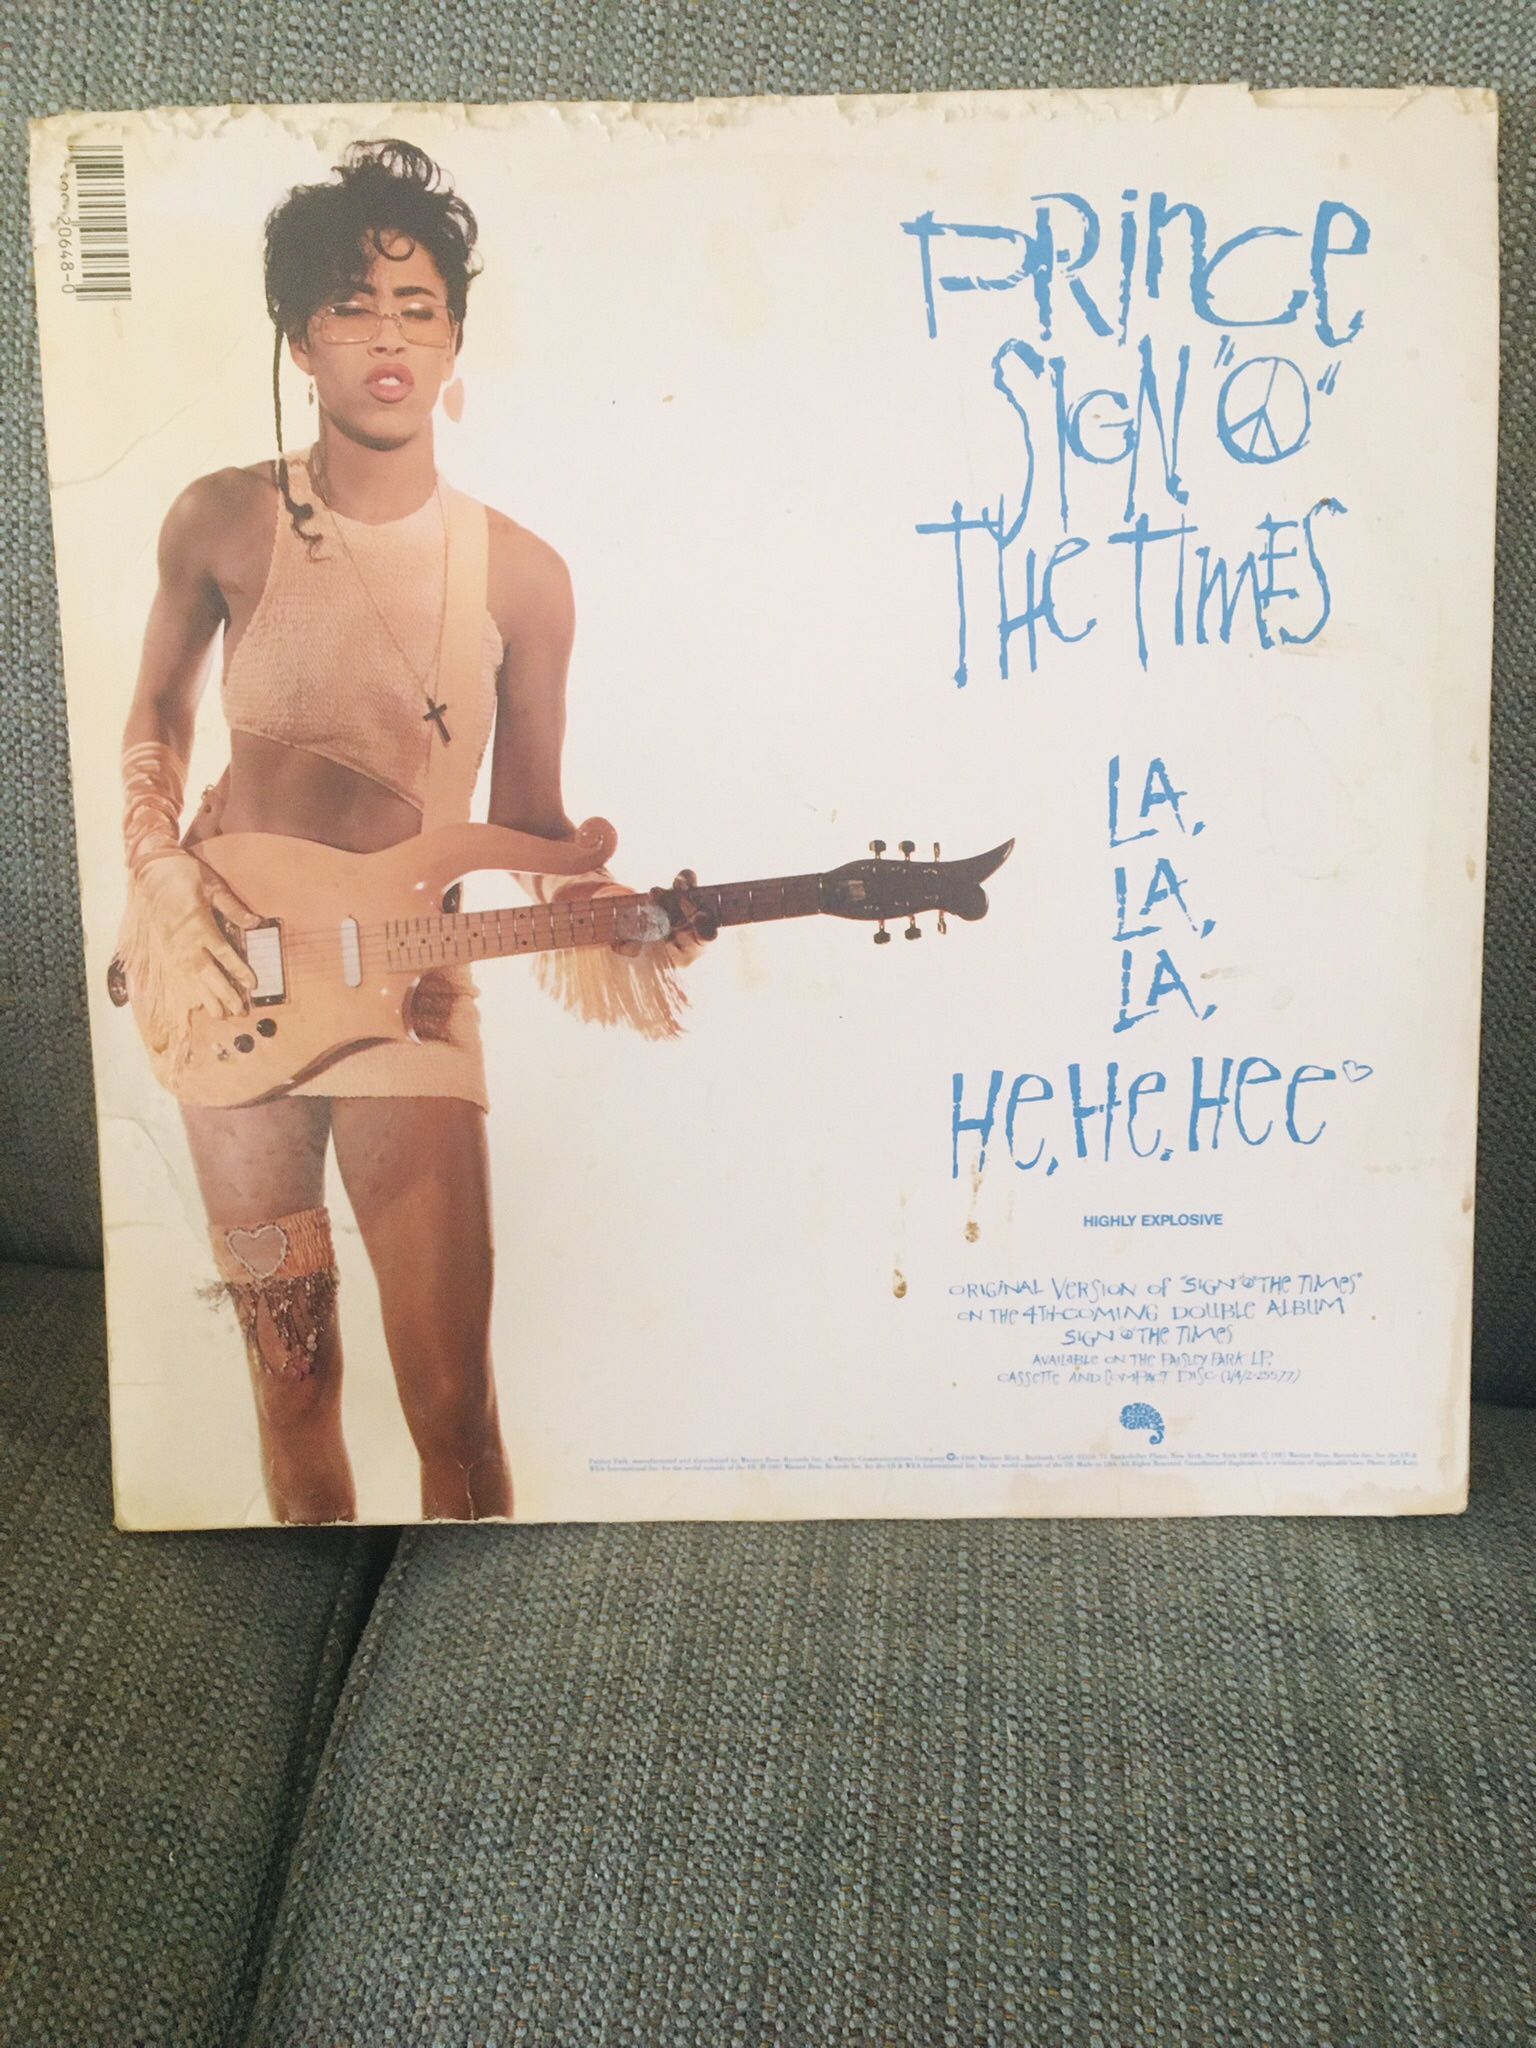 Prince Maxi single “Sign o’ The Times “ collector’s item